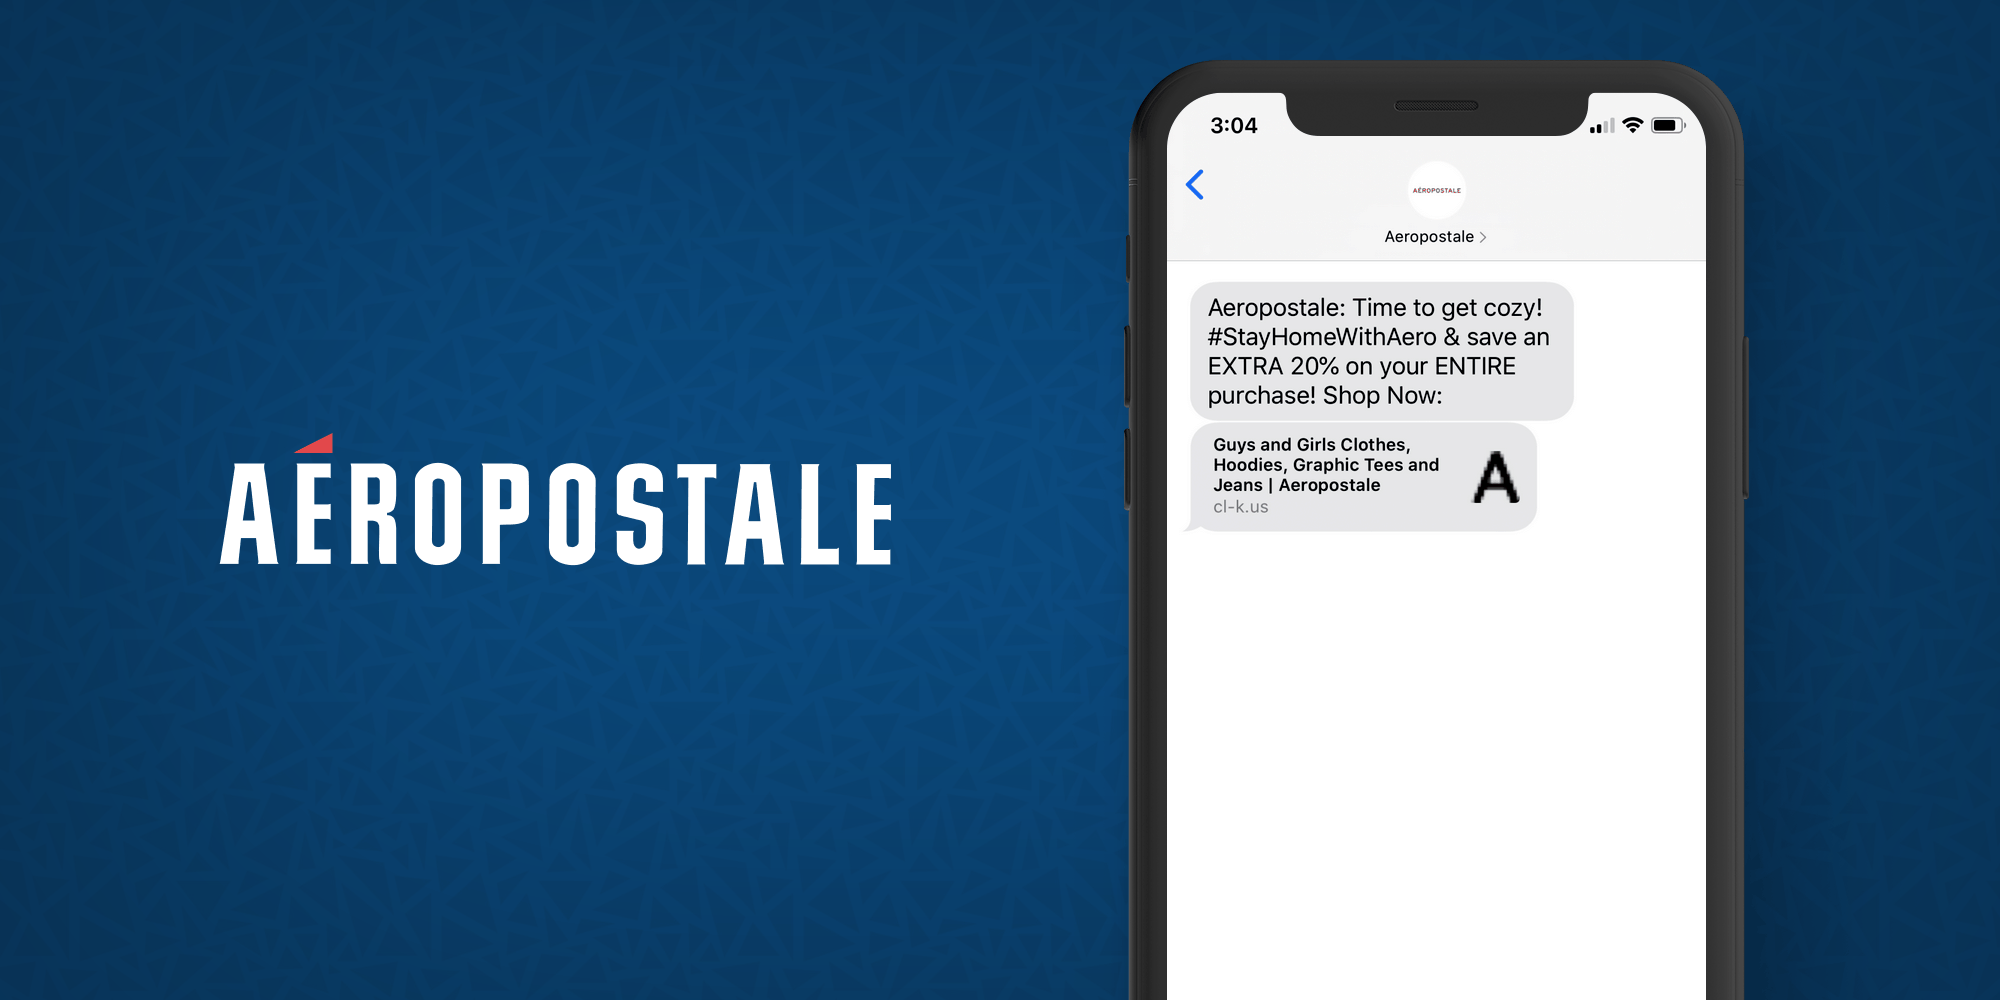 Aeropostale SMS Marketing Example - 50 Examples of Brands Using SMS Marketing